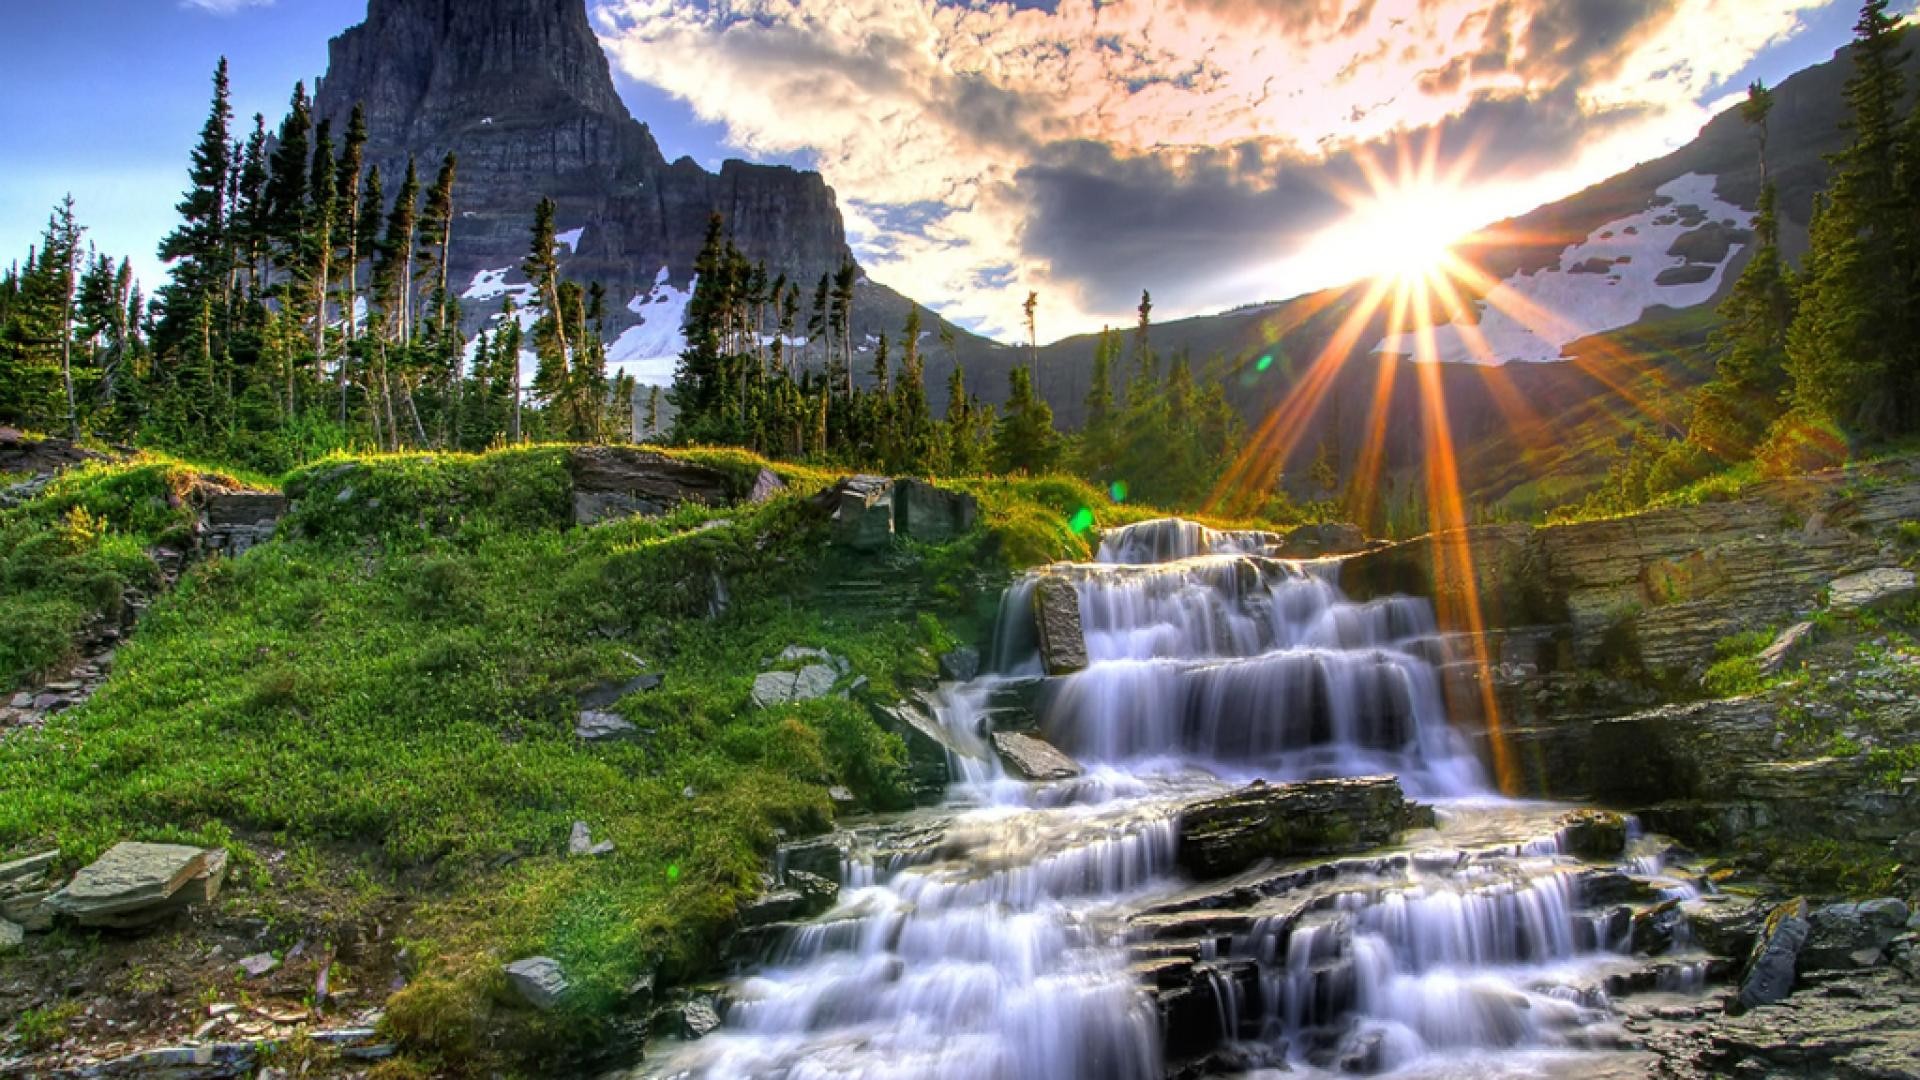 1920x1080 Wallpapers Collection Â«Waterfall WallpapersÂ» | HD Wallpapers | Pinterest |  Waterfall wallpaper, Hd wallpaper and Wallpaper